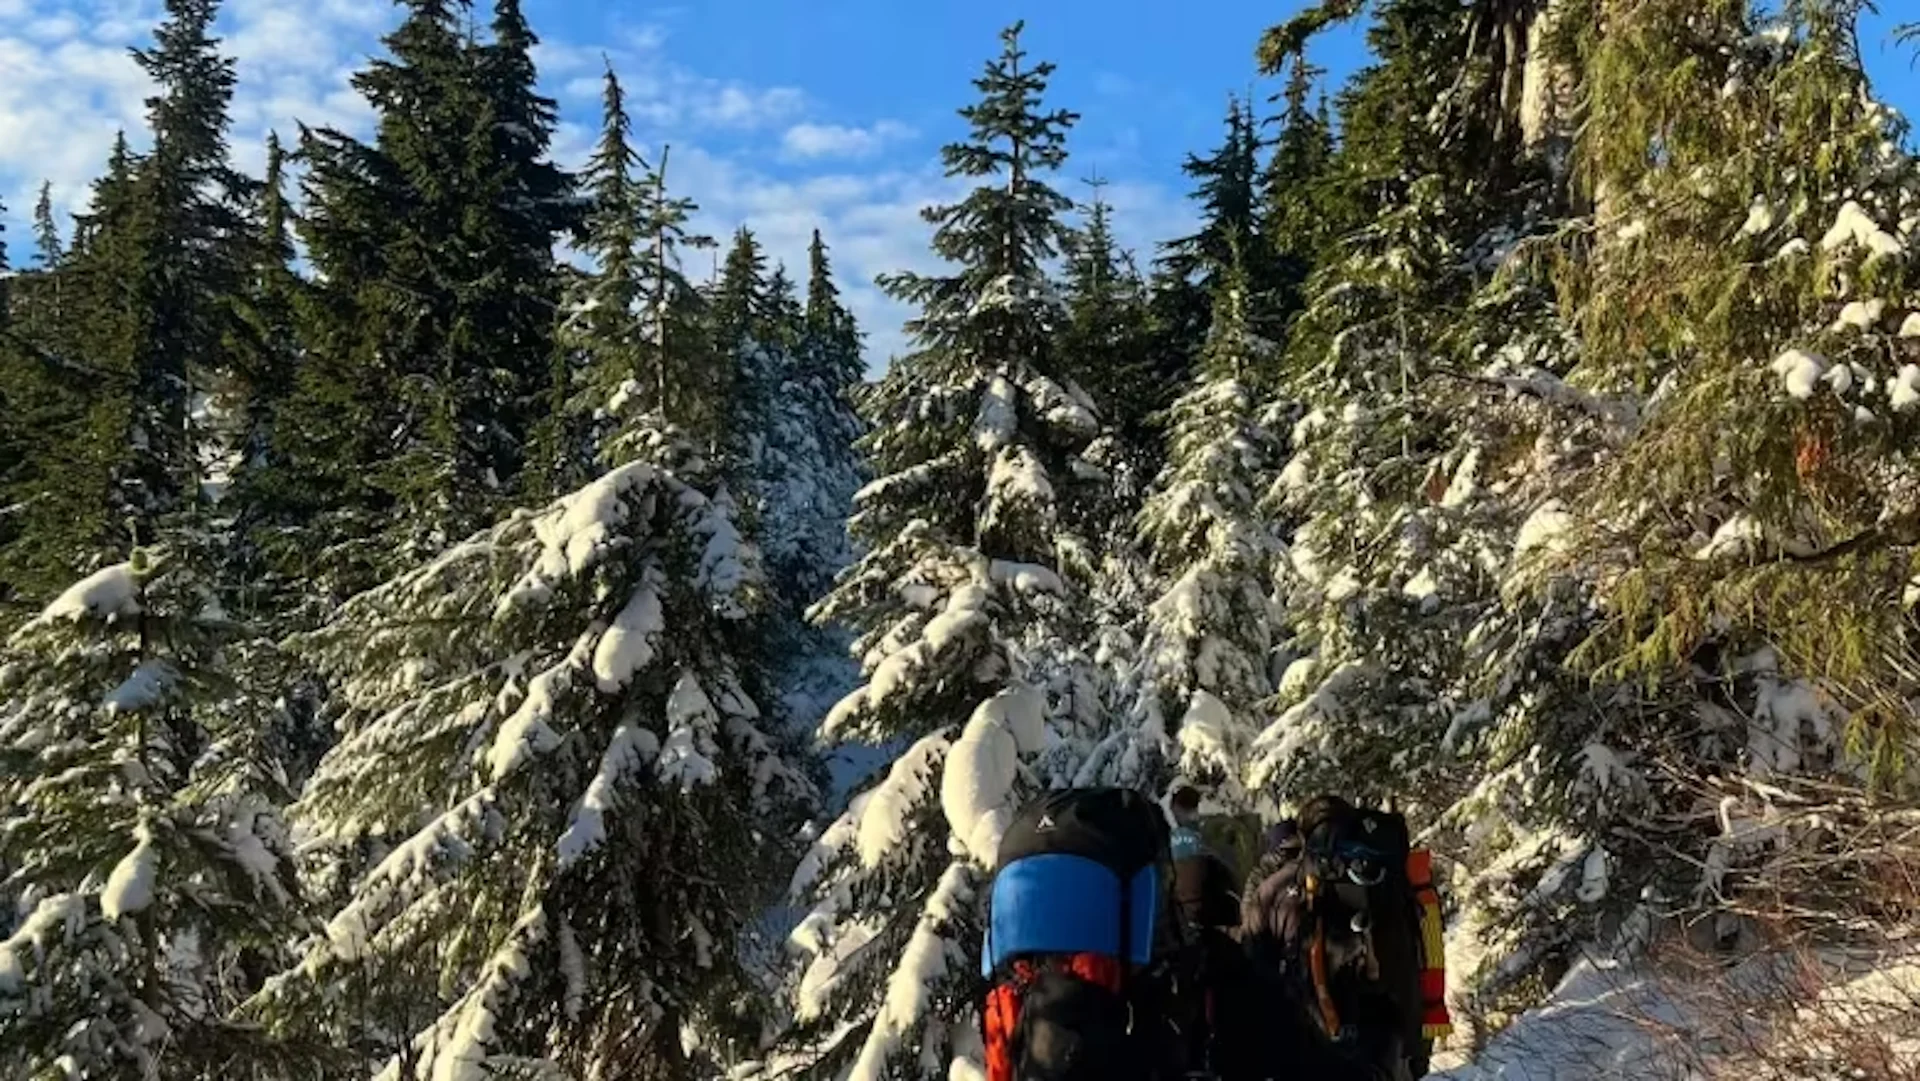 Crews urge caution after 2 hikers rescued from winter conditions in one night